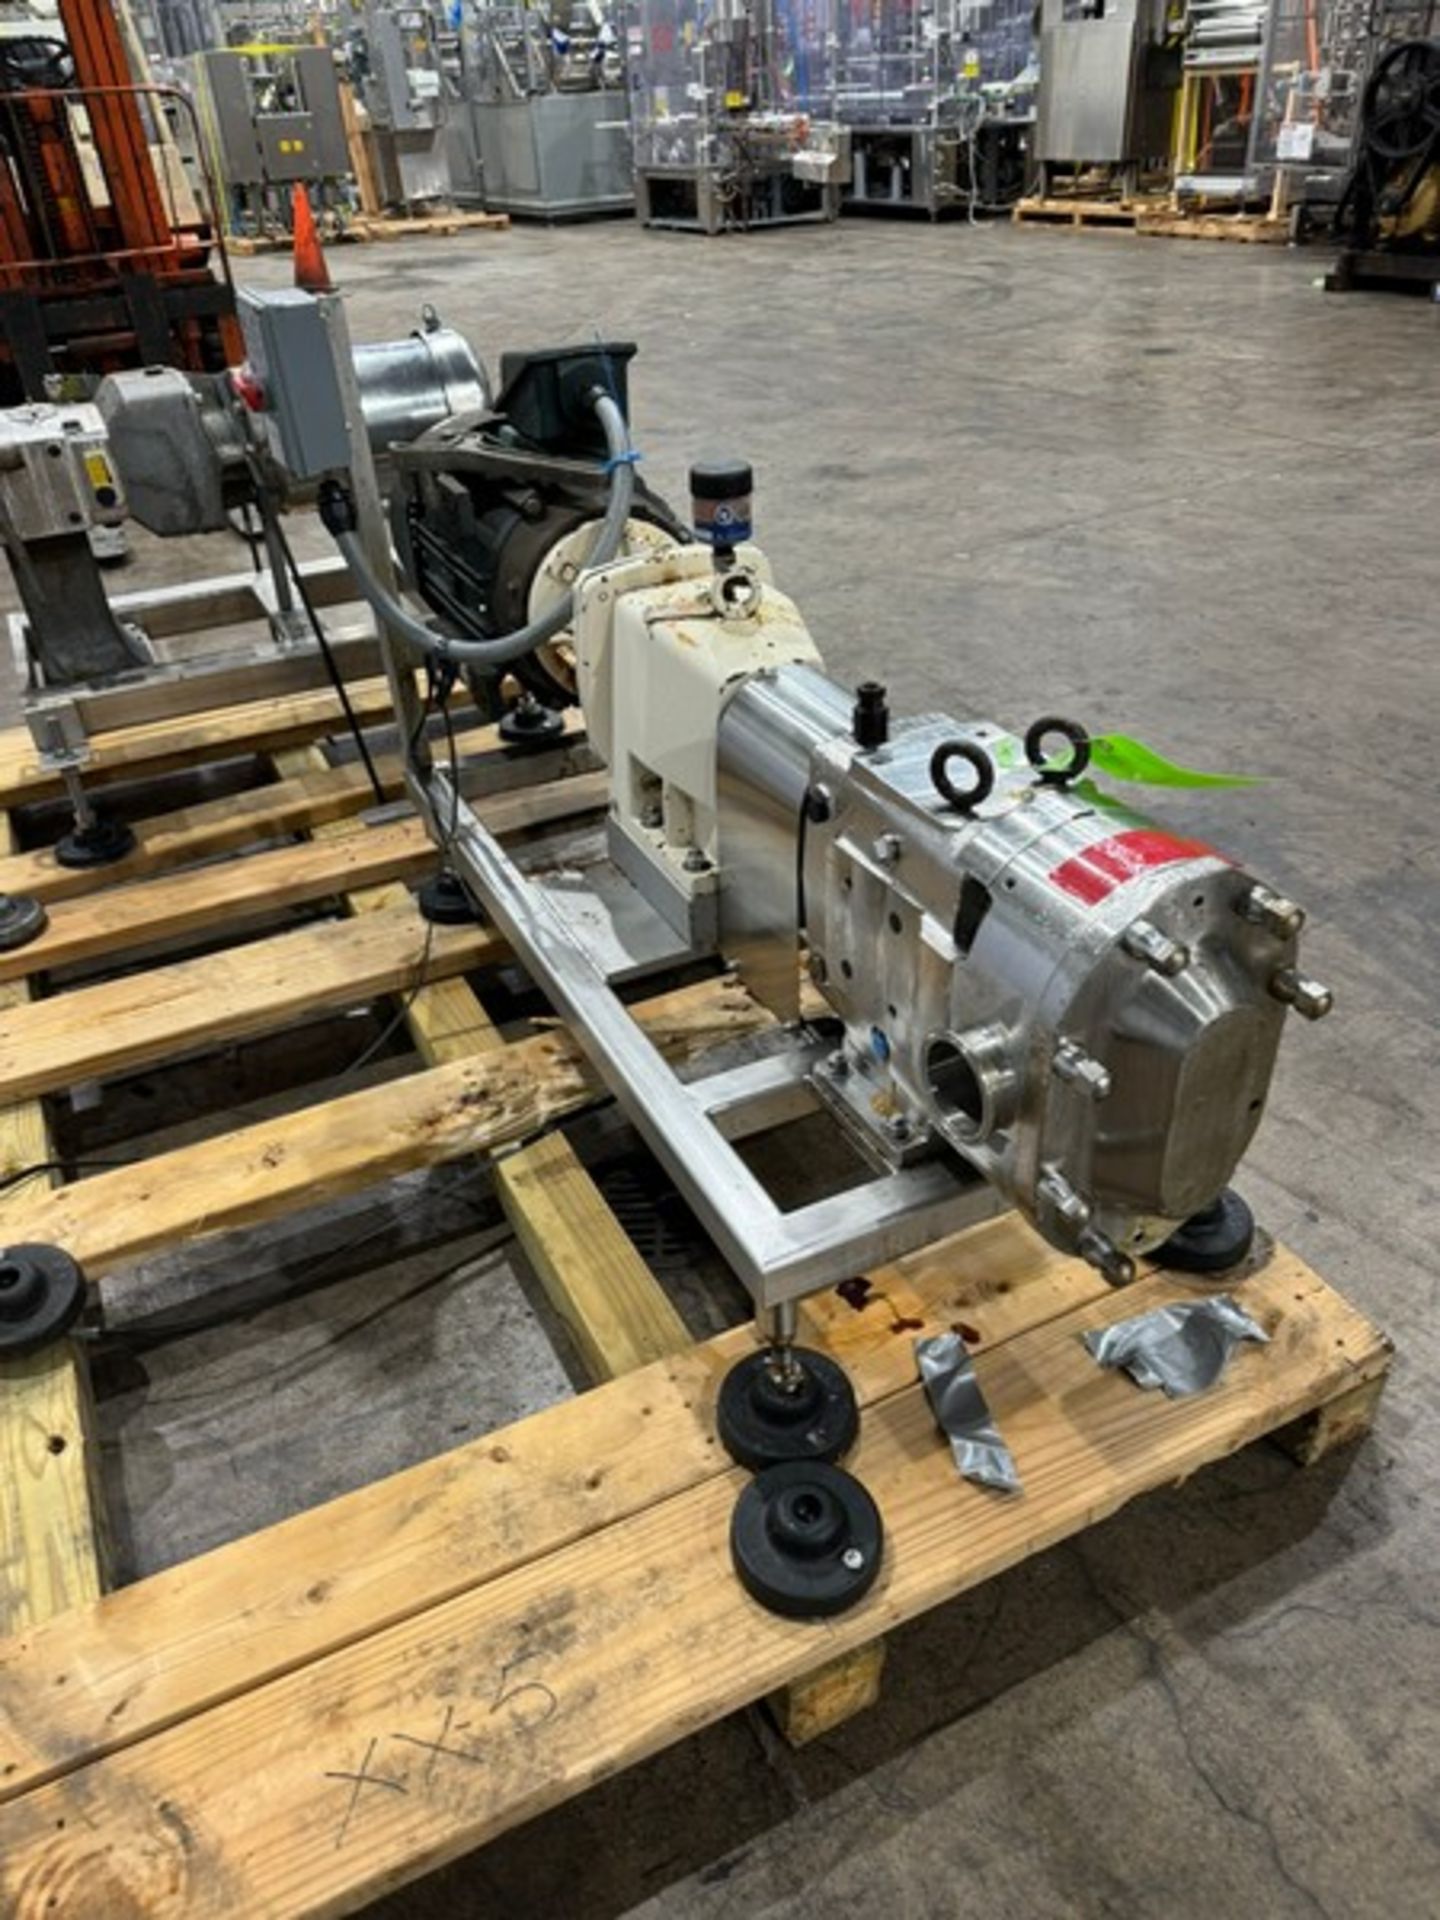 2012 Waukesha Cherry-Burrell 15 hp Positive Displacement Pump, M/N 130U2, S/N 1000002765245, with - Image 8 of 12